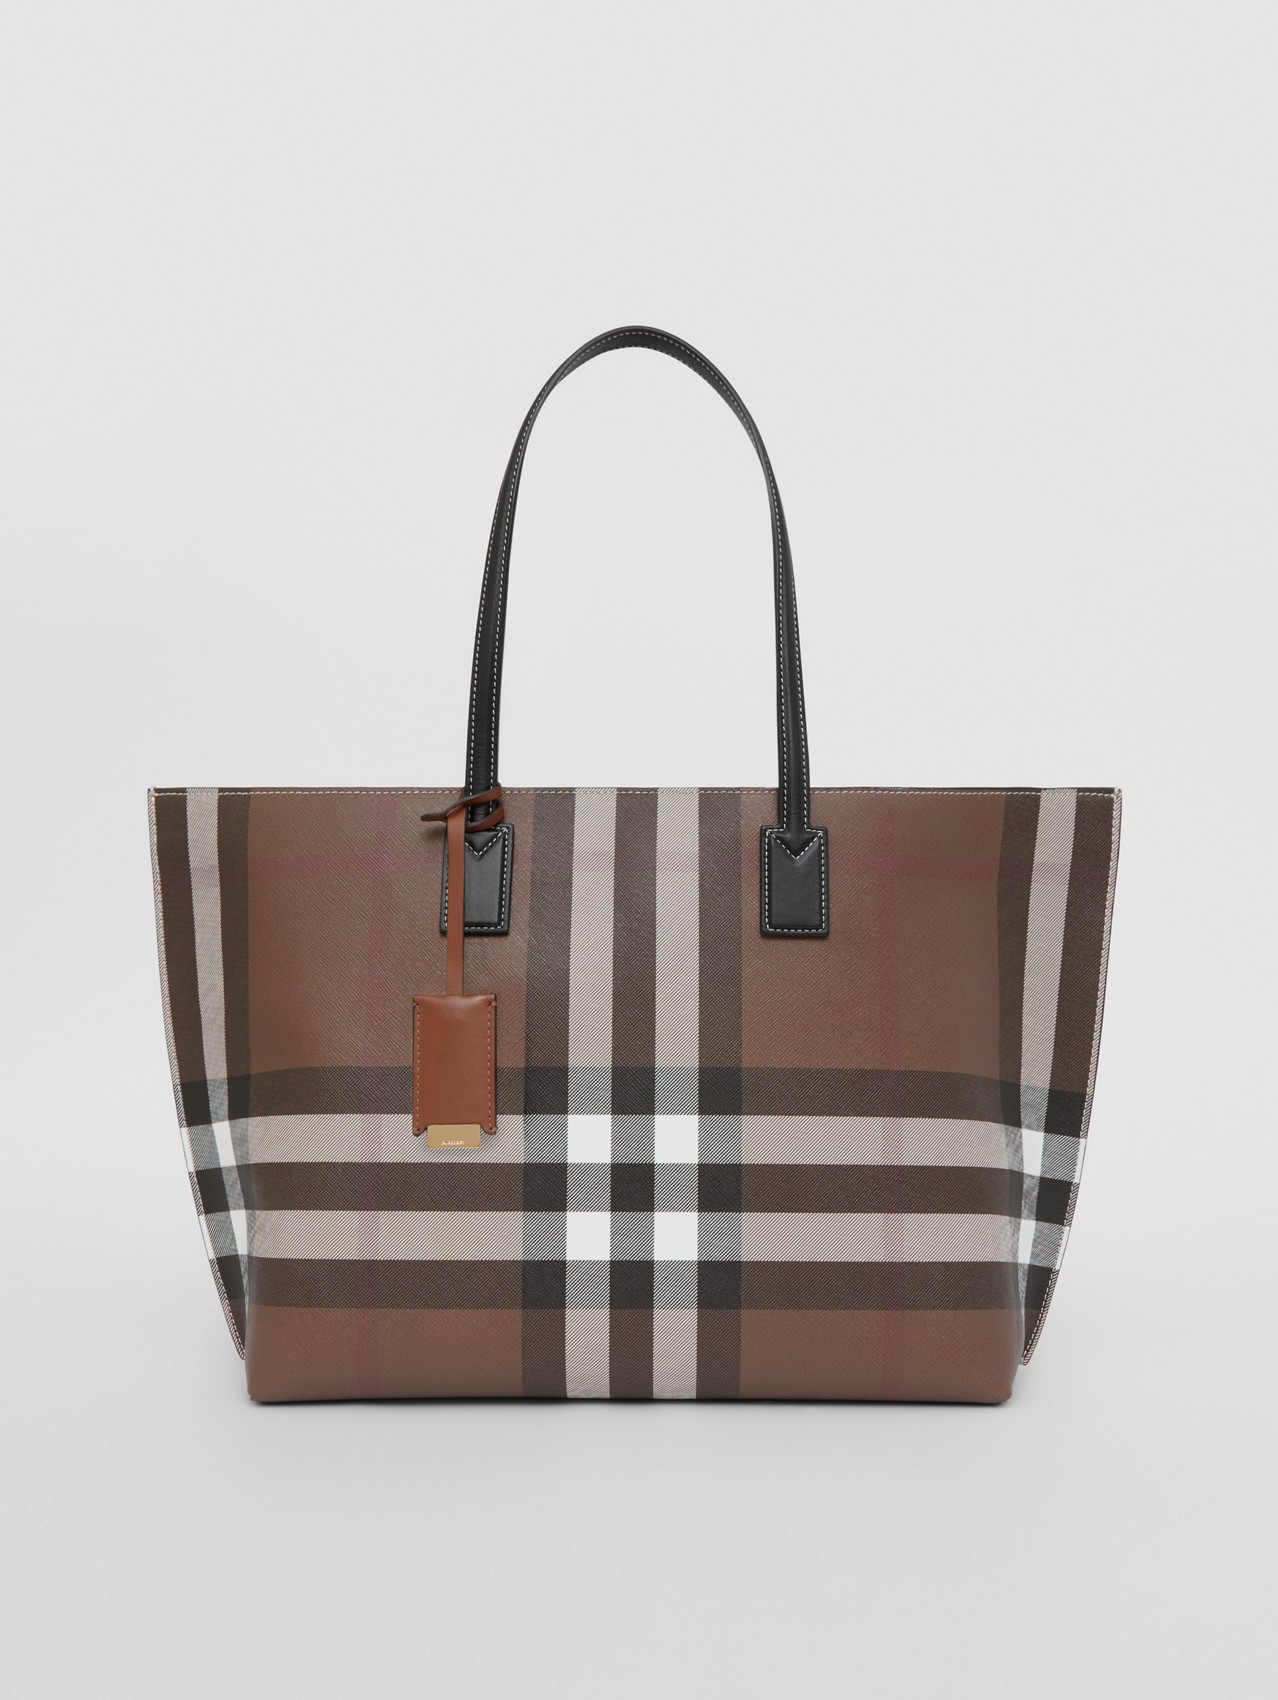 Refurbishment Lure Alaska Women's Bags | Check & Leather Bags for Women | Burberry® Official